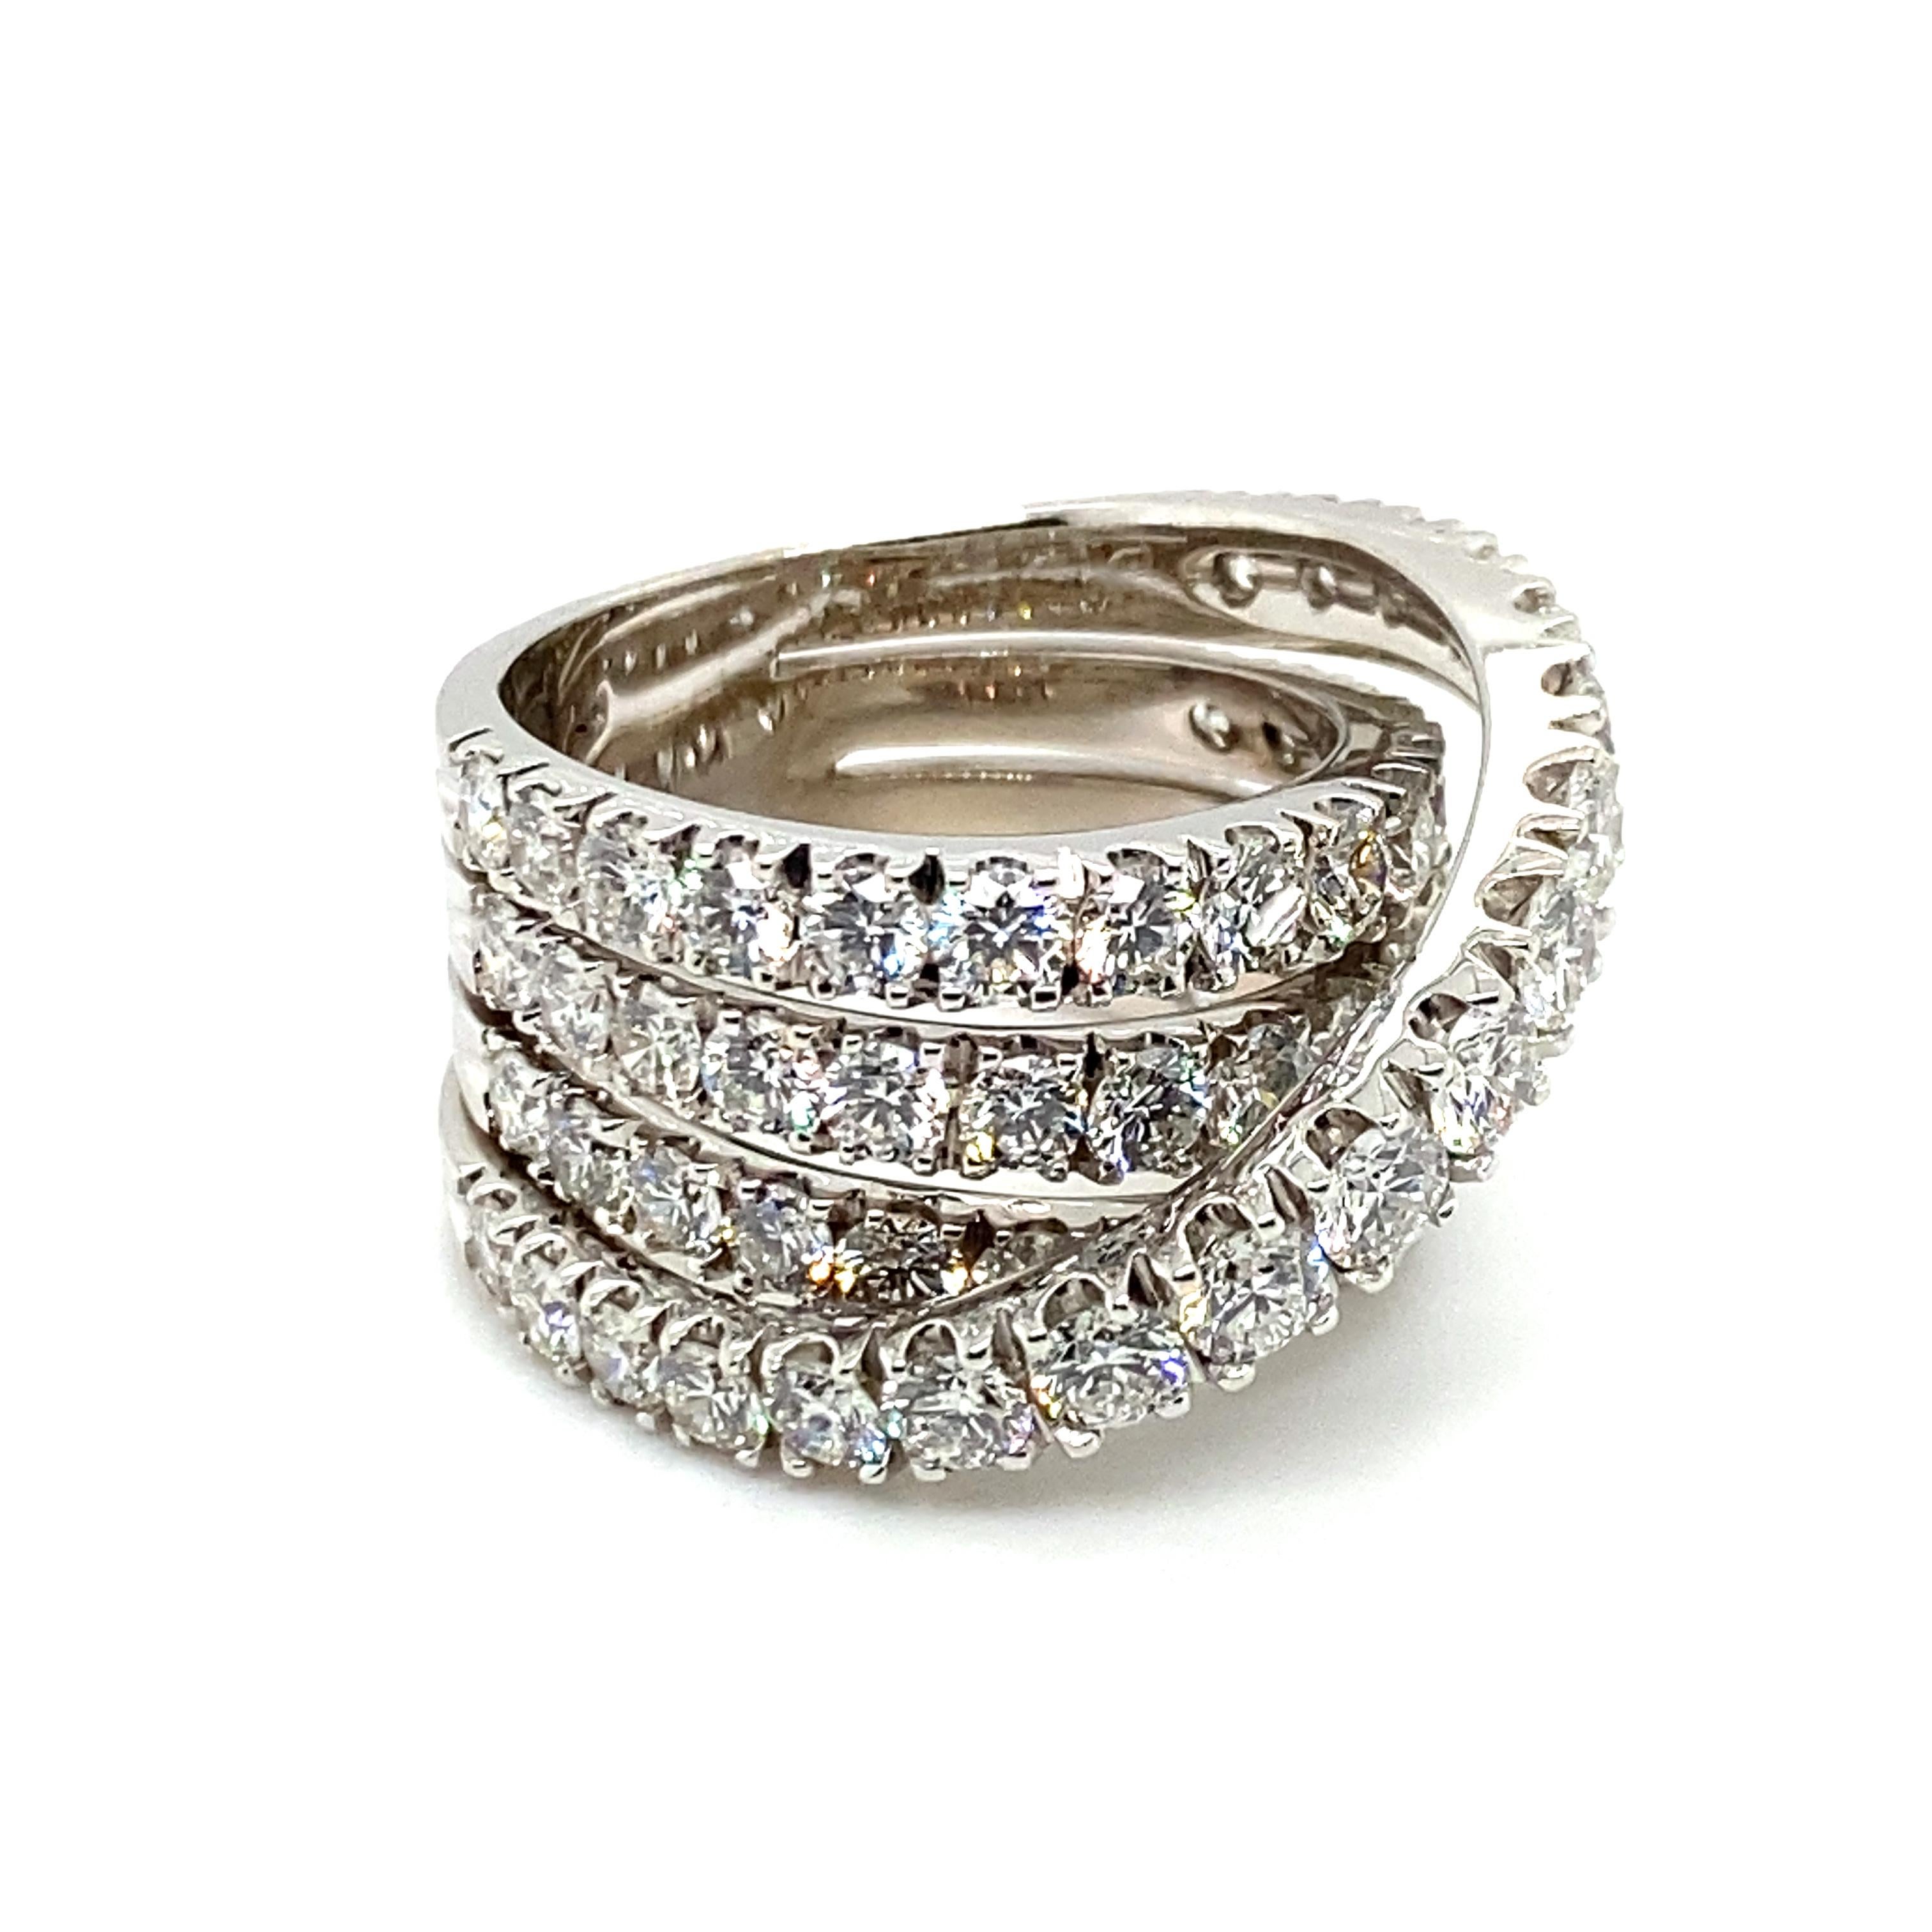 Super Sparkling Diamond Ring by Crivelli in 18 Karat White Gold In Excellent Condition For Sale In Lucerne, CH